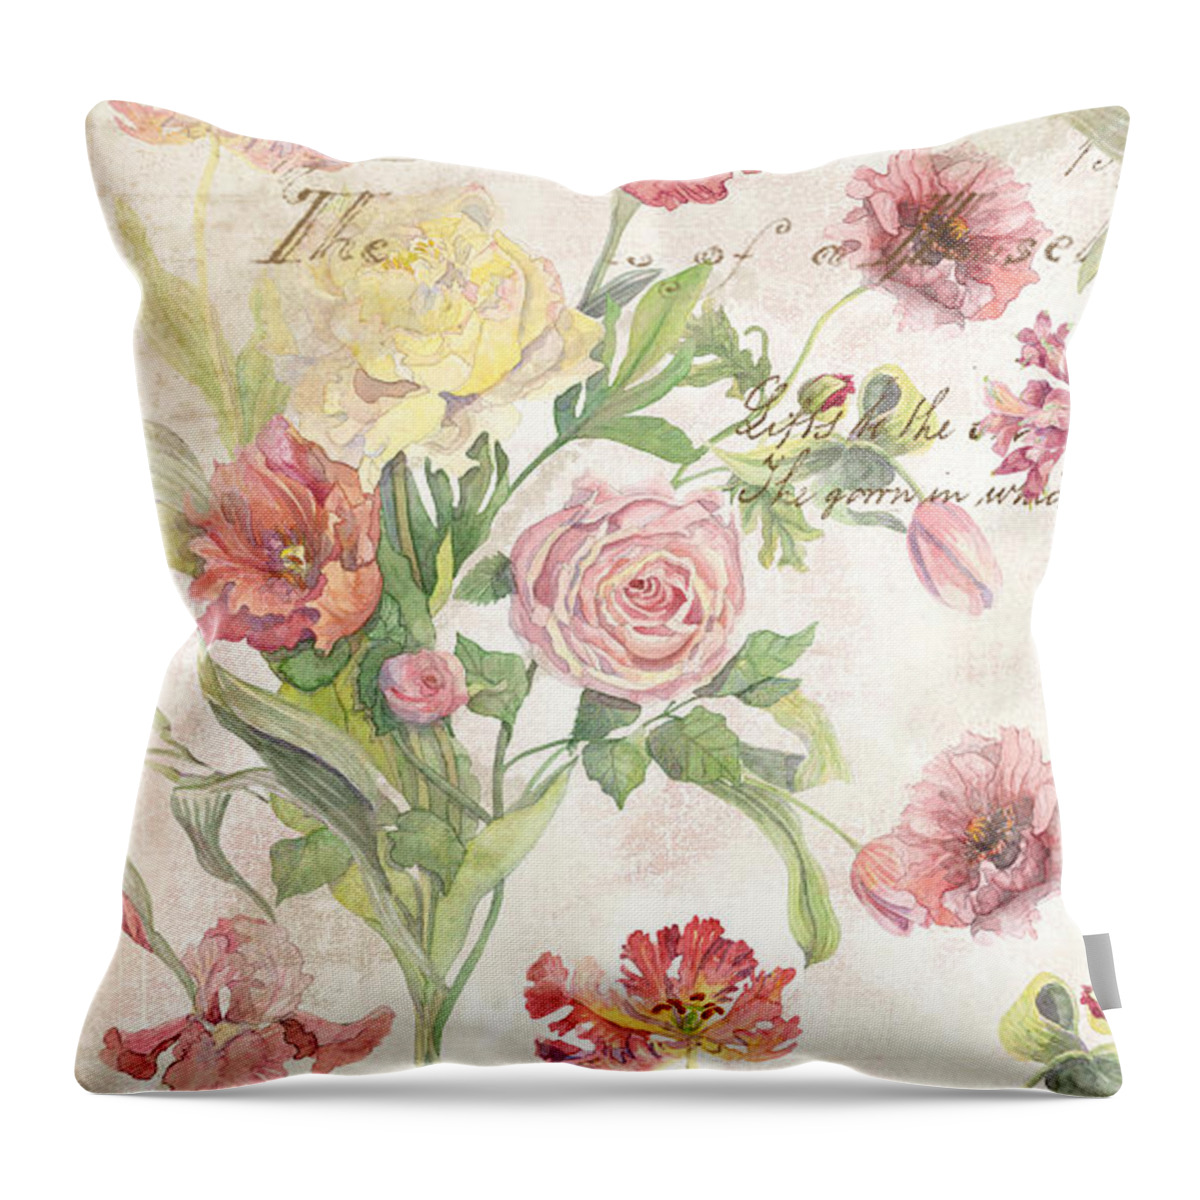 Peony Throw Pillow featuring the painting Fleurs de Pivoine - Watercolor in a French Vintage Wallpaper Style by Audrey Jeanne Roberts